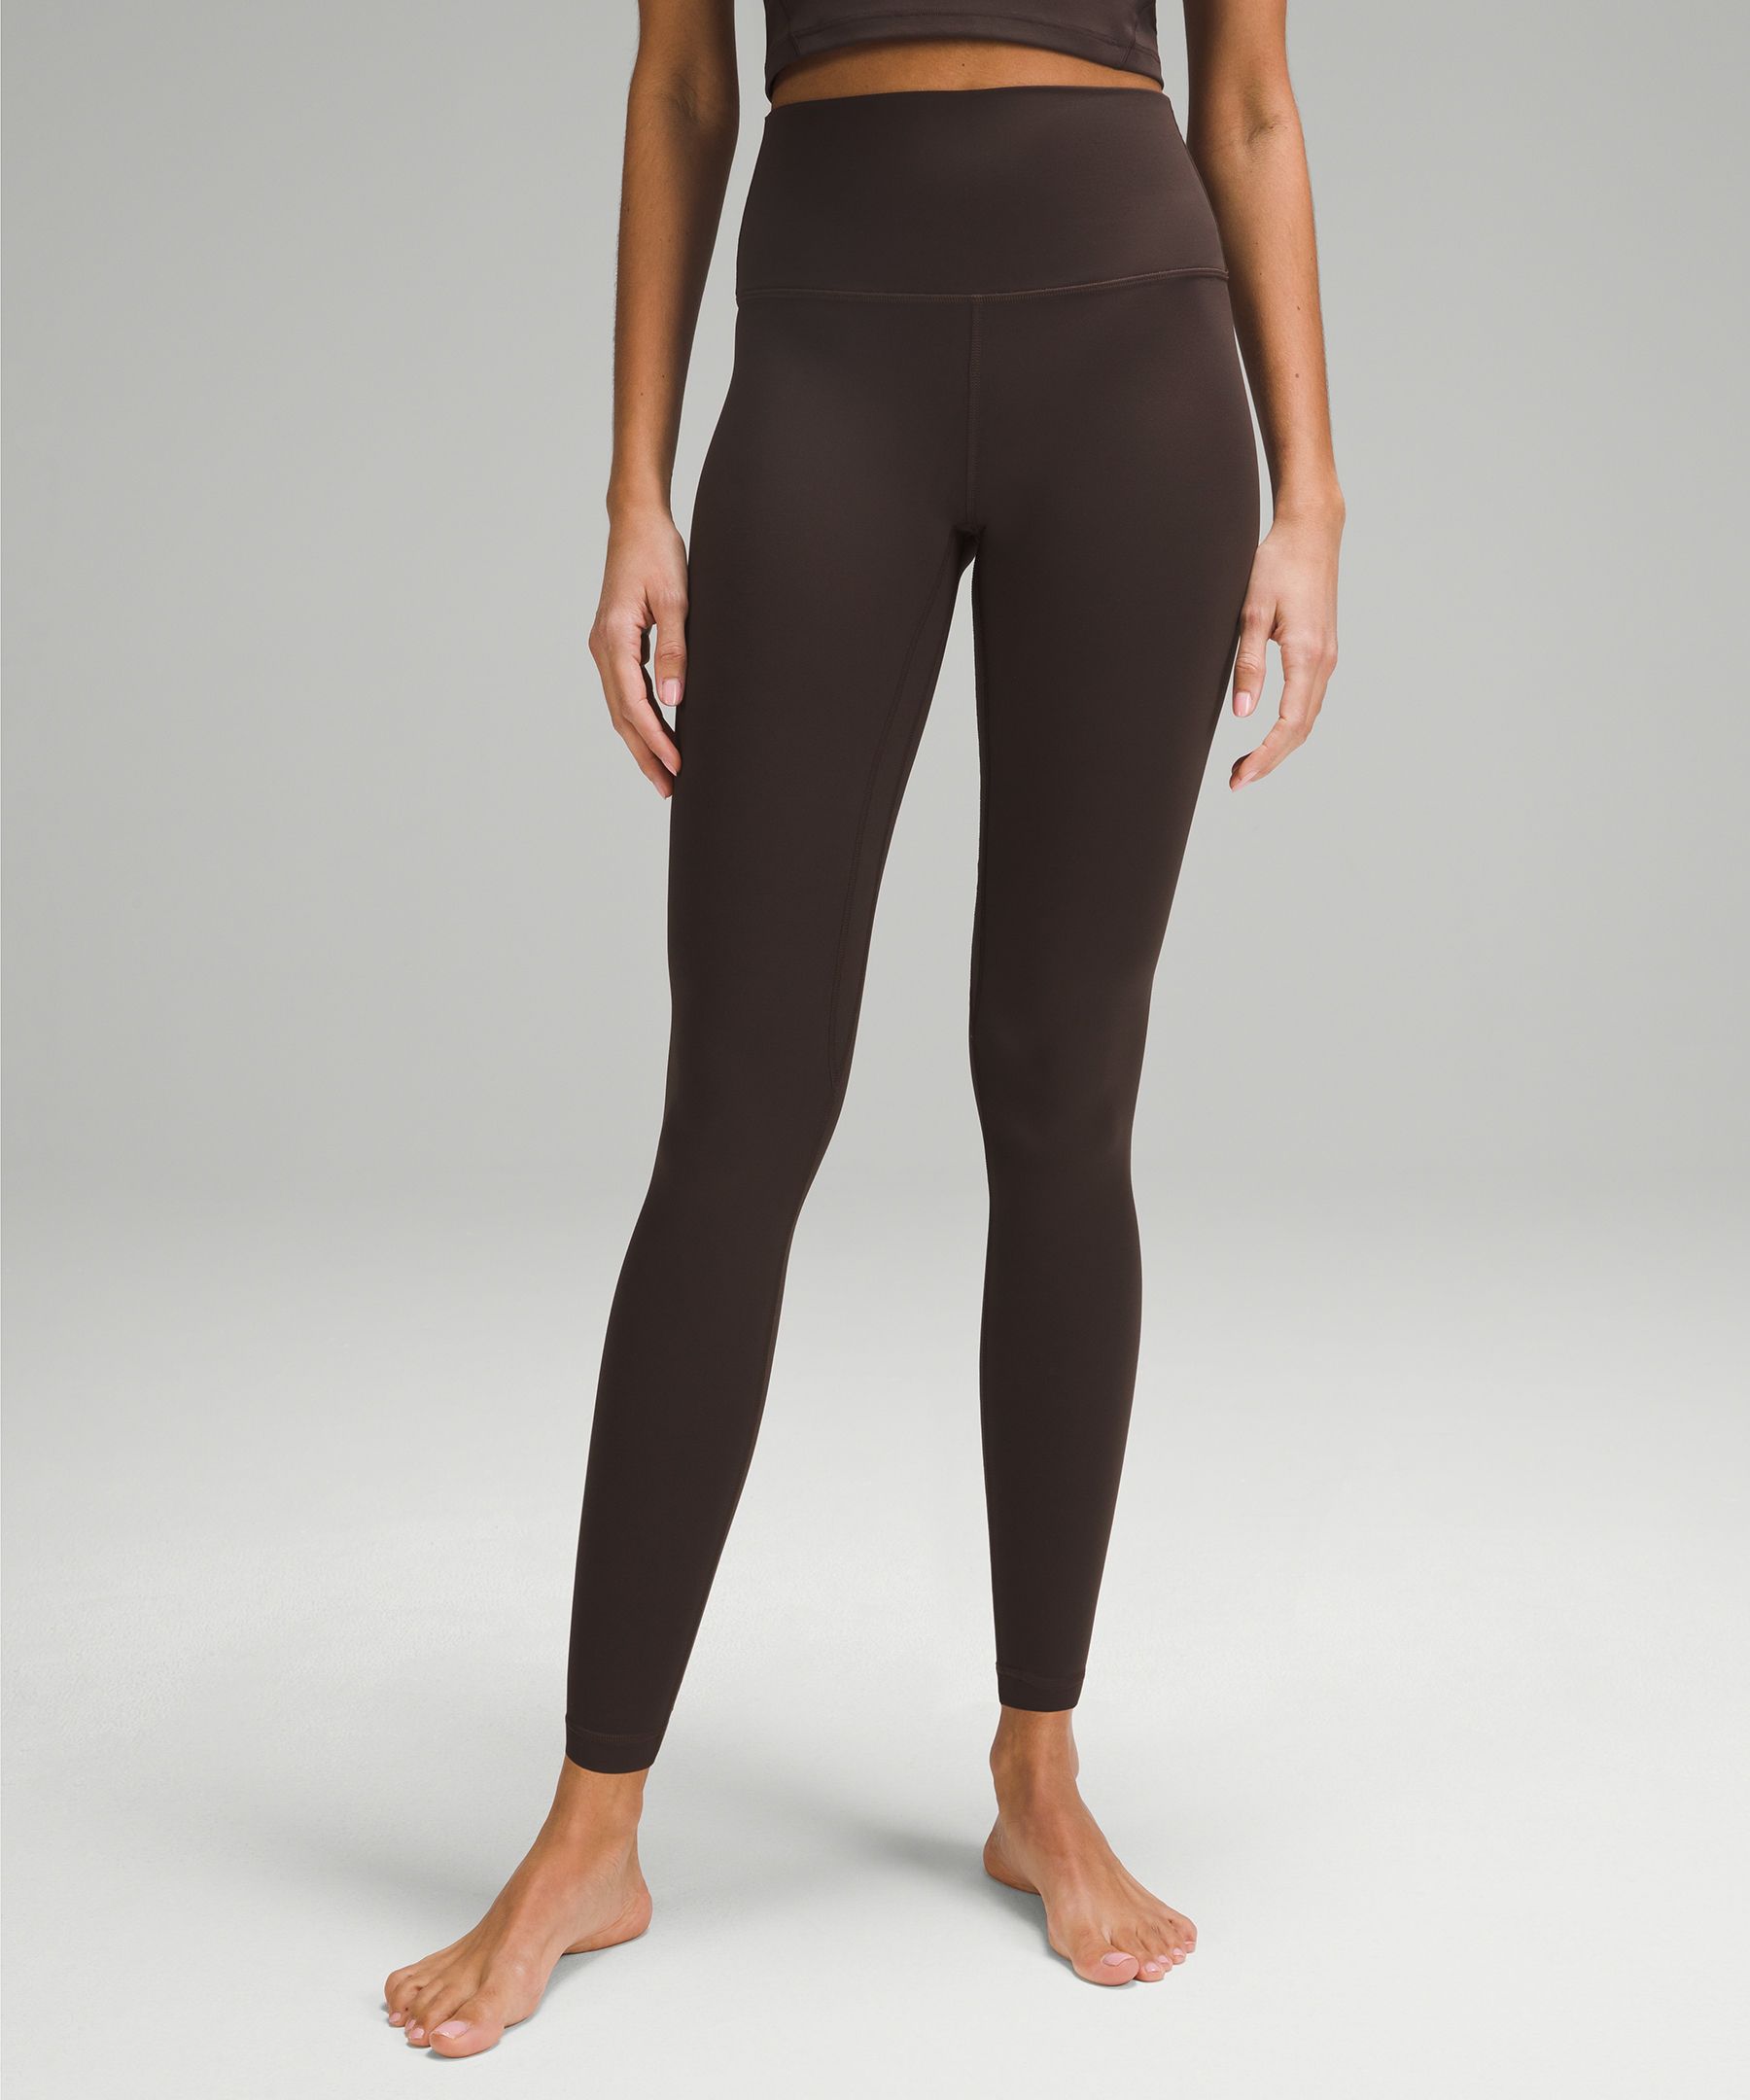 Lululemon Sonic Pink Align High-Rise Pant Size 6 - $88 (31% Off